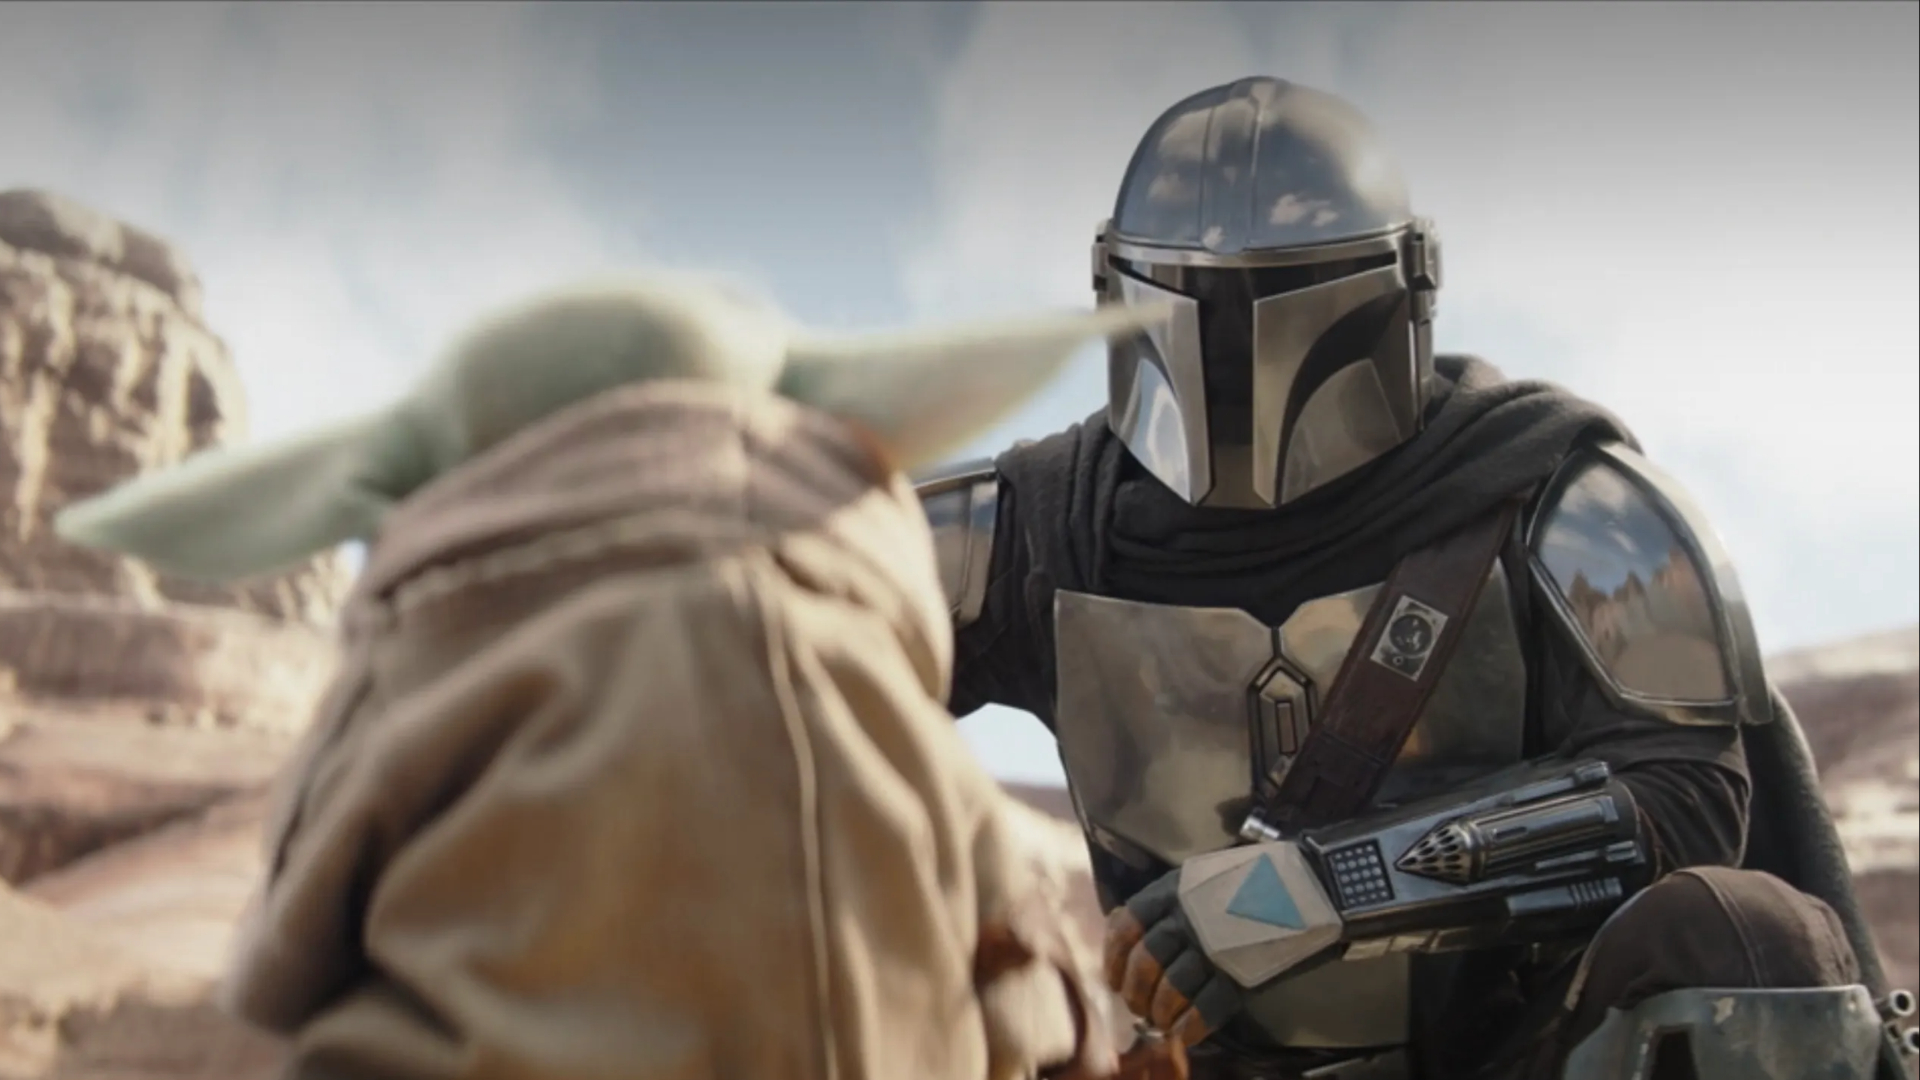 The Mandalorian season 3 wasted its big reveal in episode 6